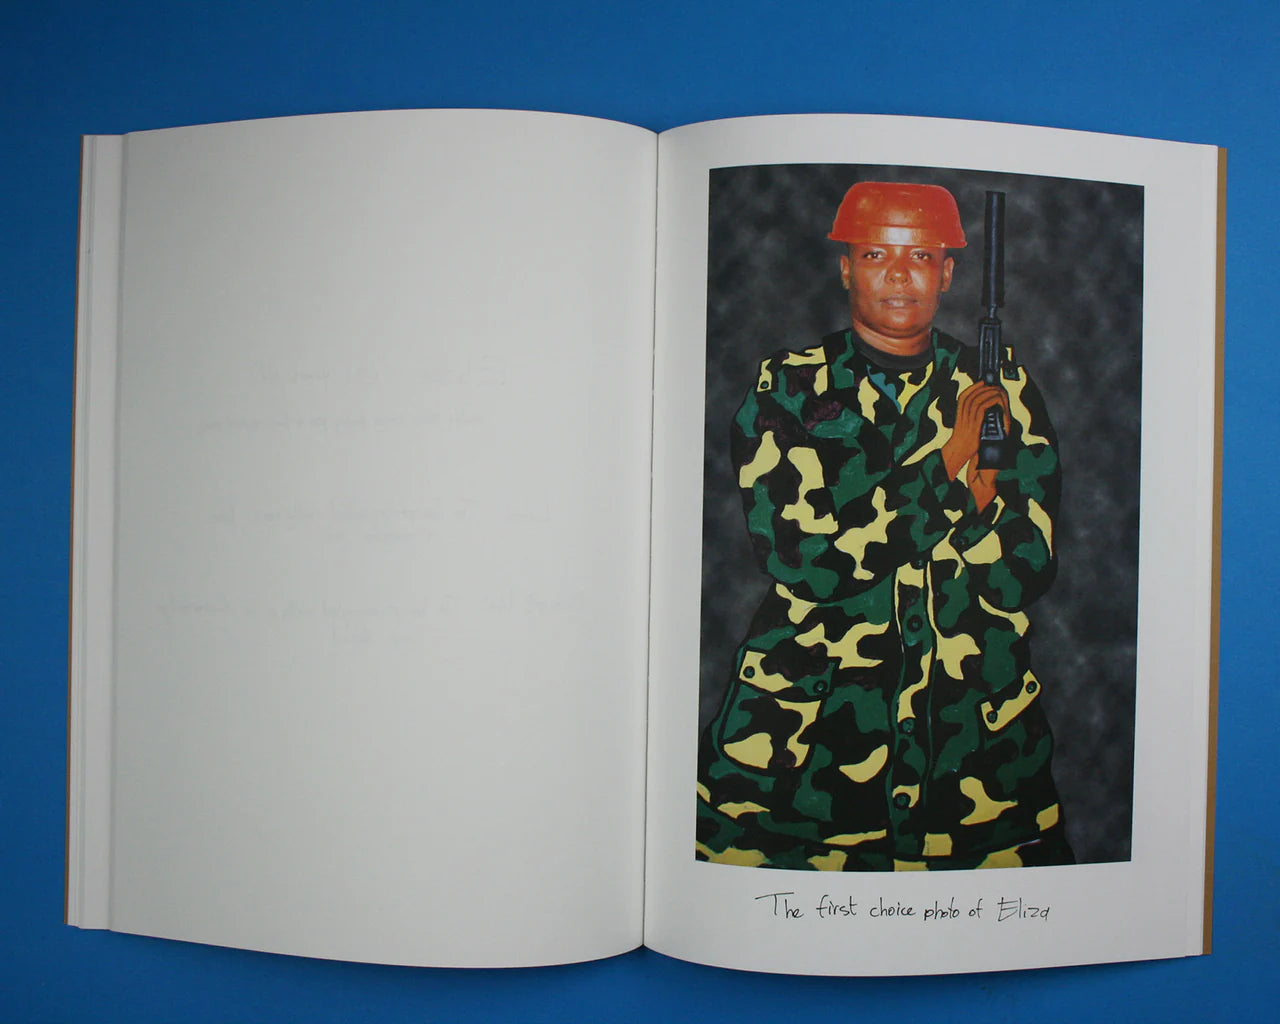 New ways of photographing the new masai by Jan Hoek